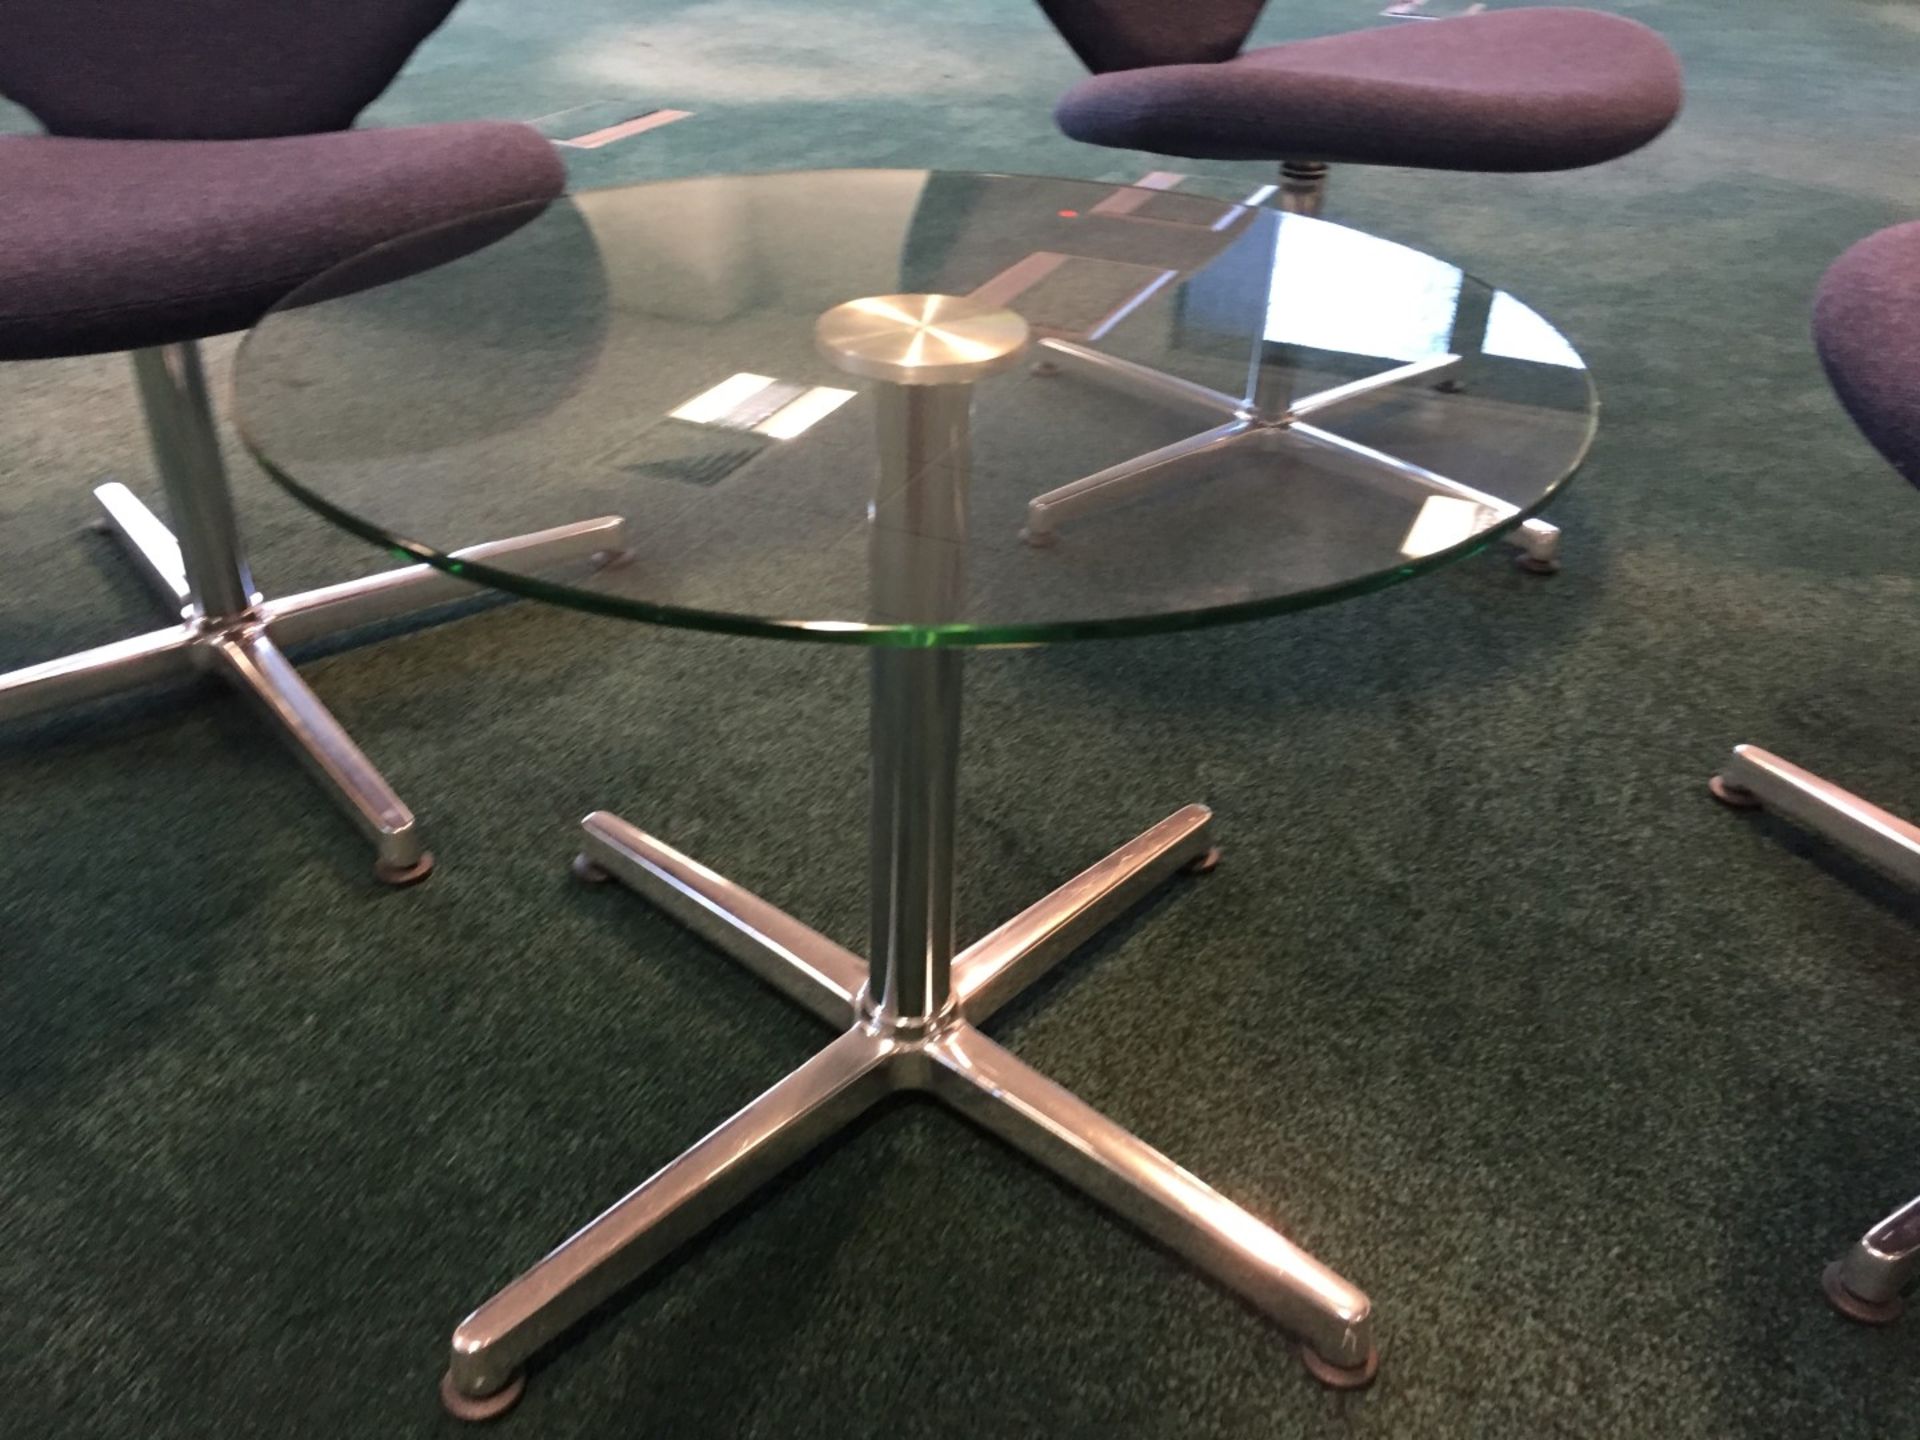 1 x Modern Coffee Table Featuring a Thick Round Glass Surface and Cross Feet Chrome Base - Premium - Image 2 of 3